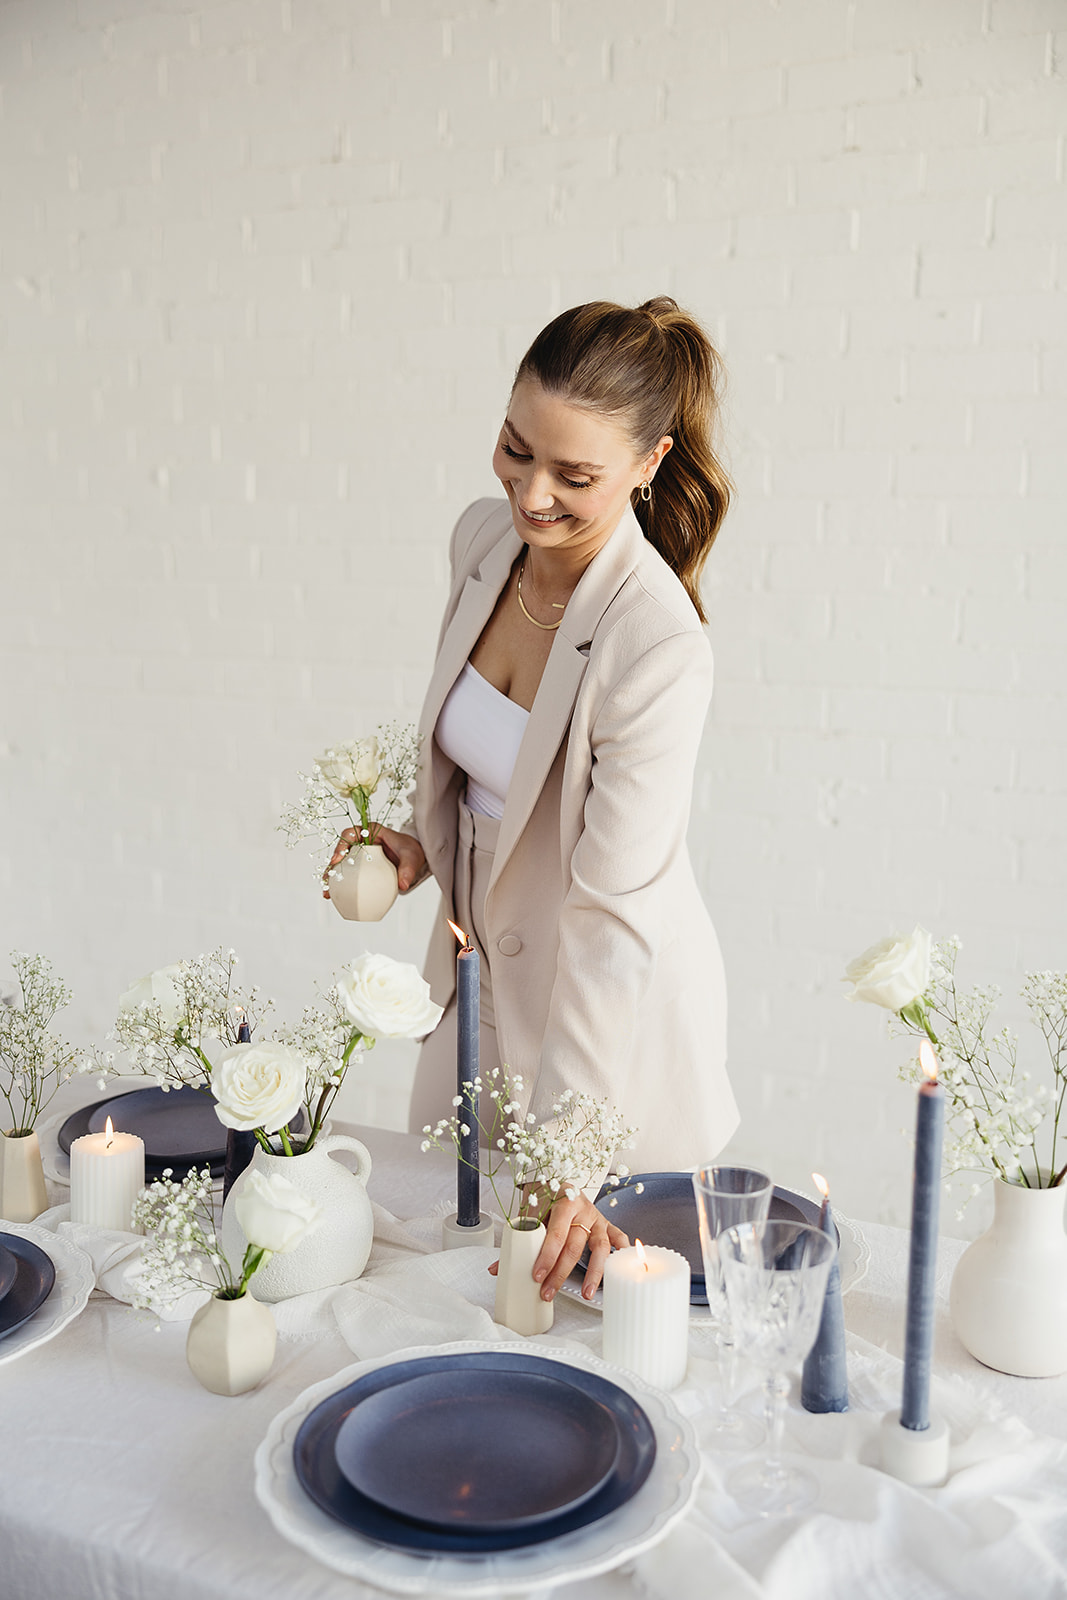 Girl in suit placing candles and plates onto a table